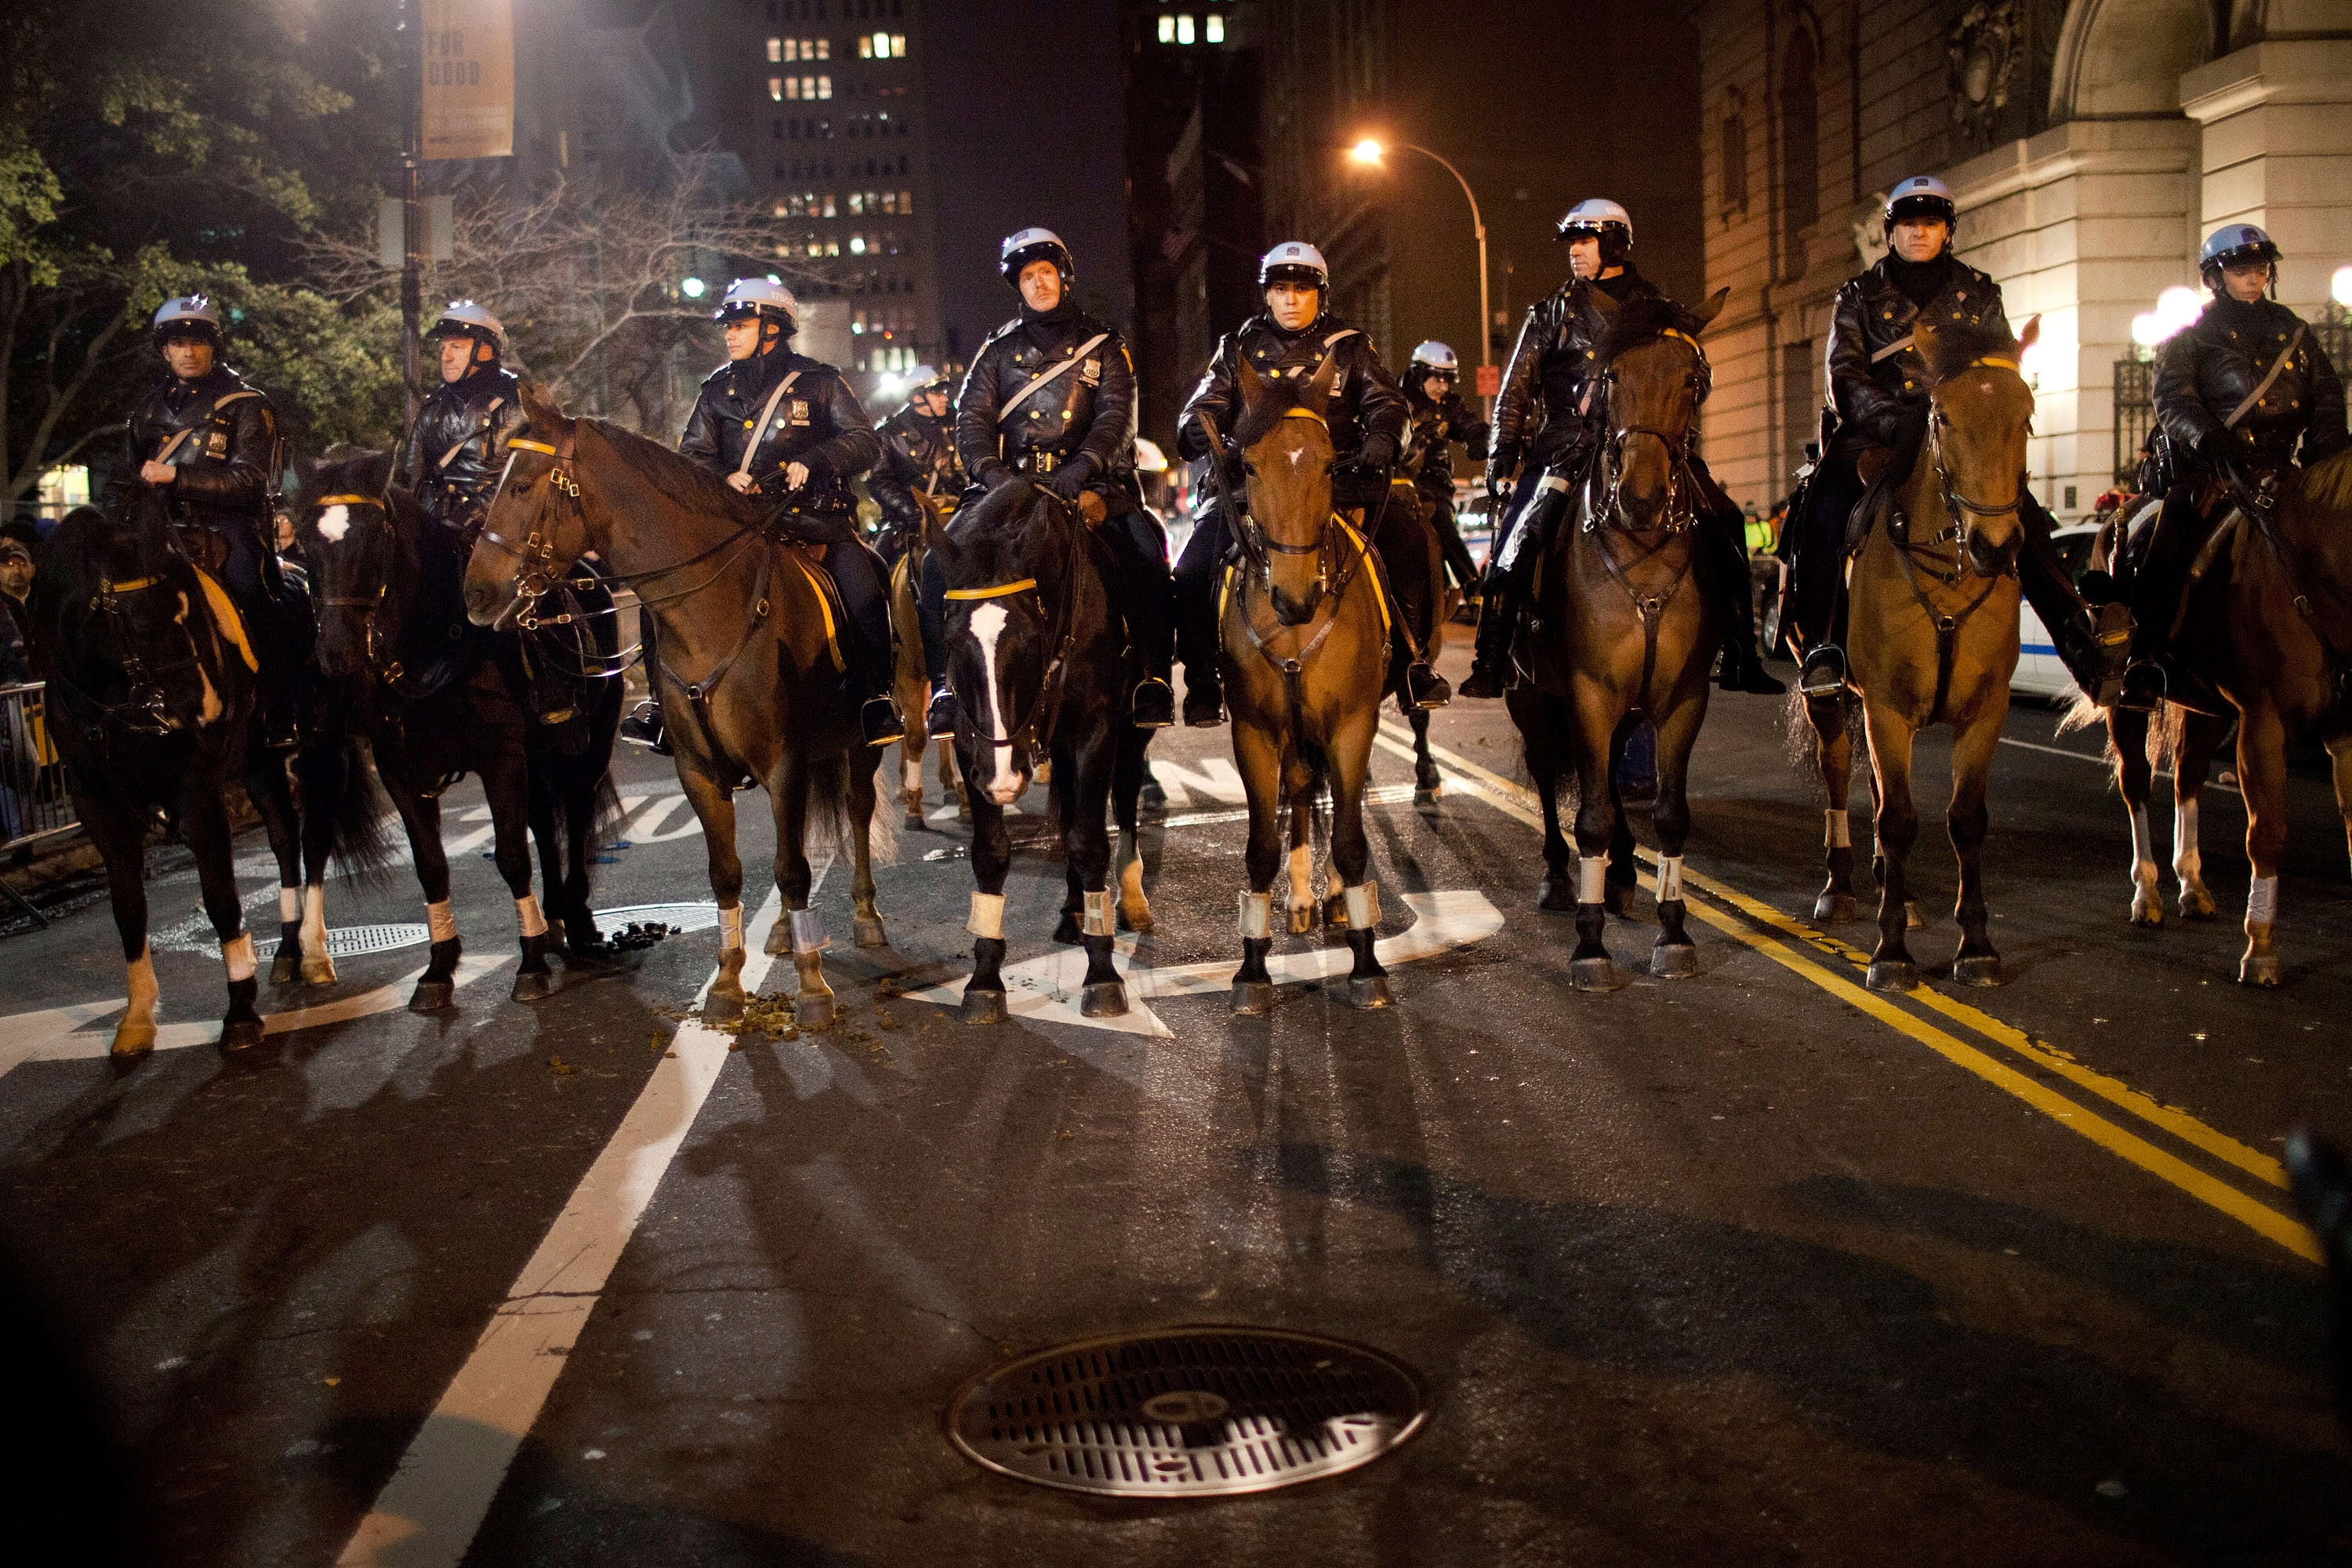 protest, Anarchy, Police, Horse Wallpaper